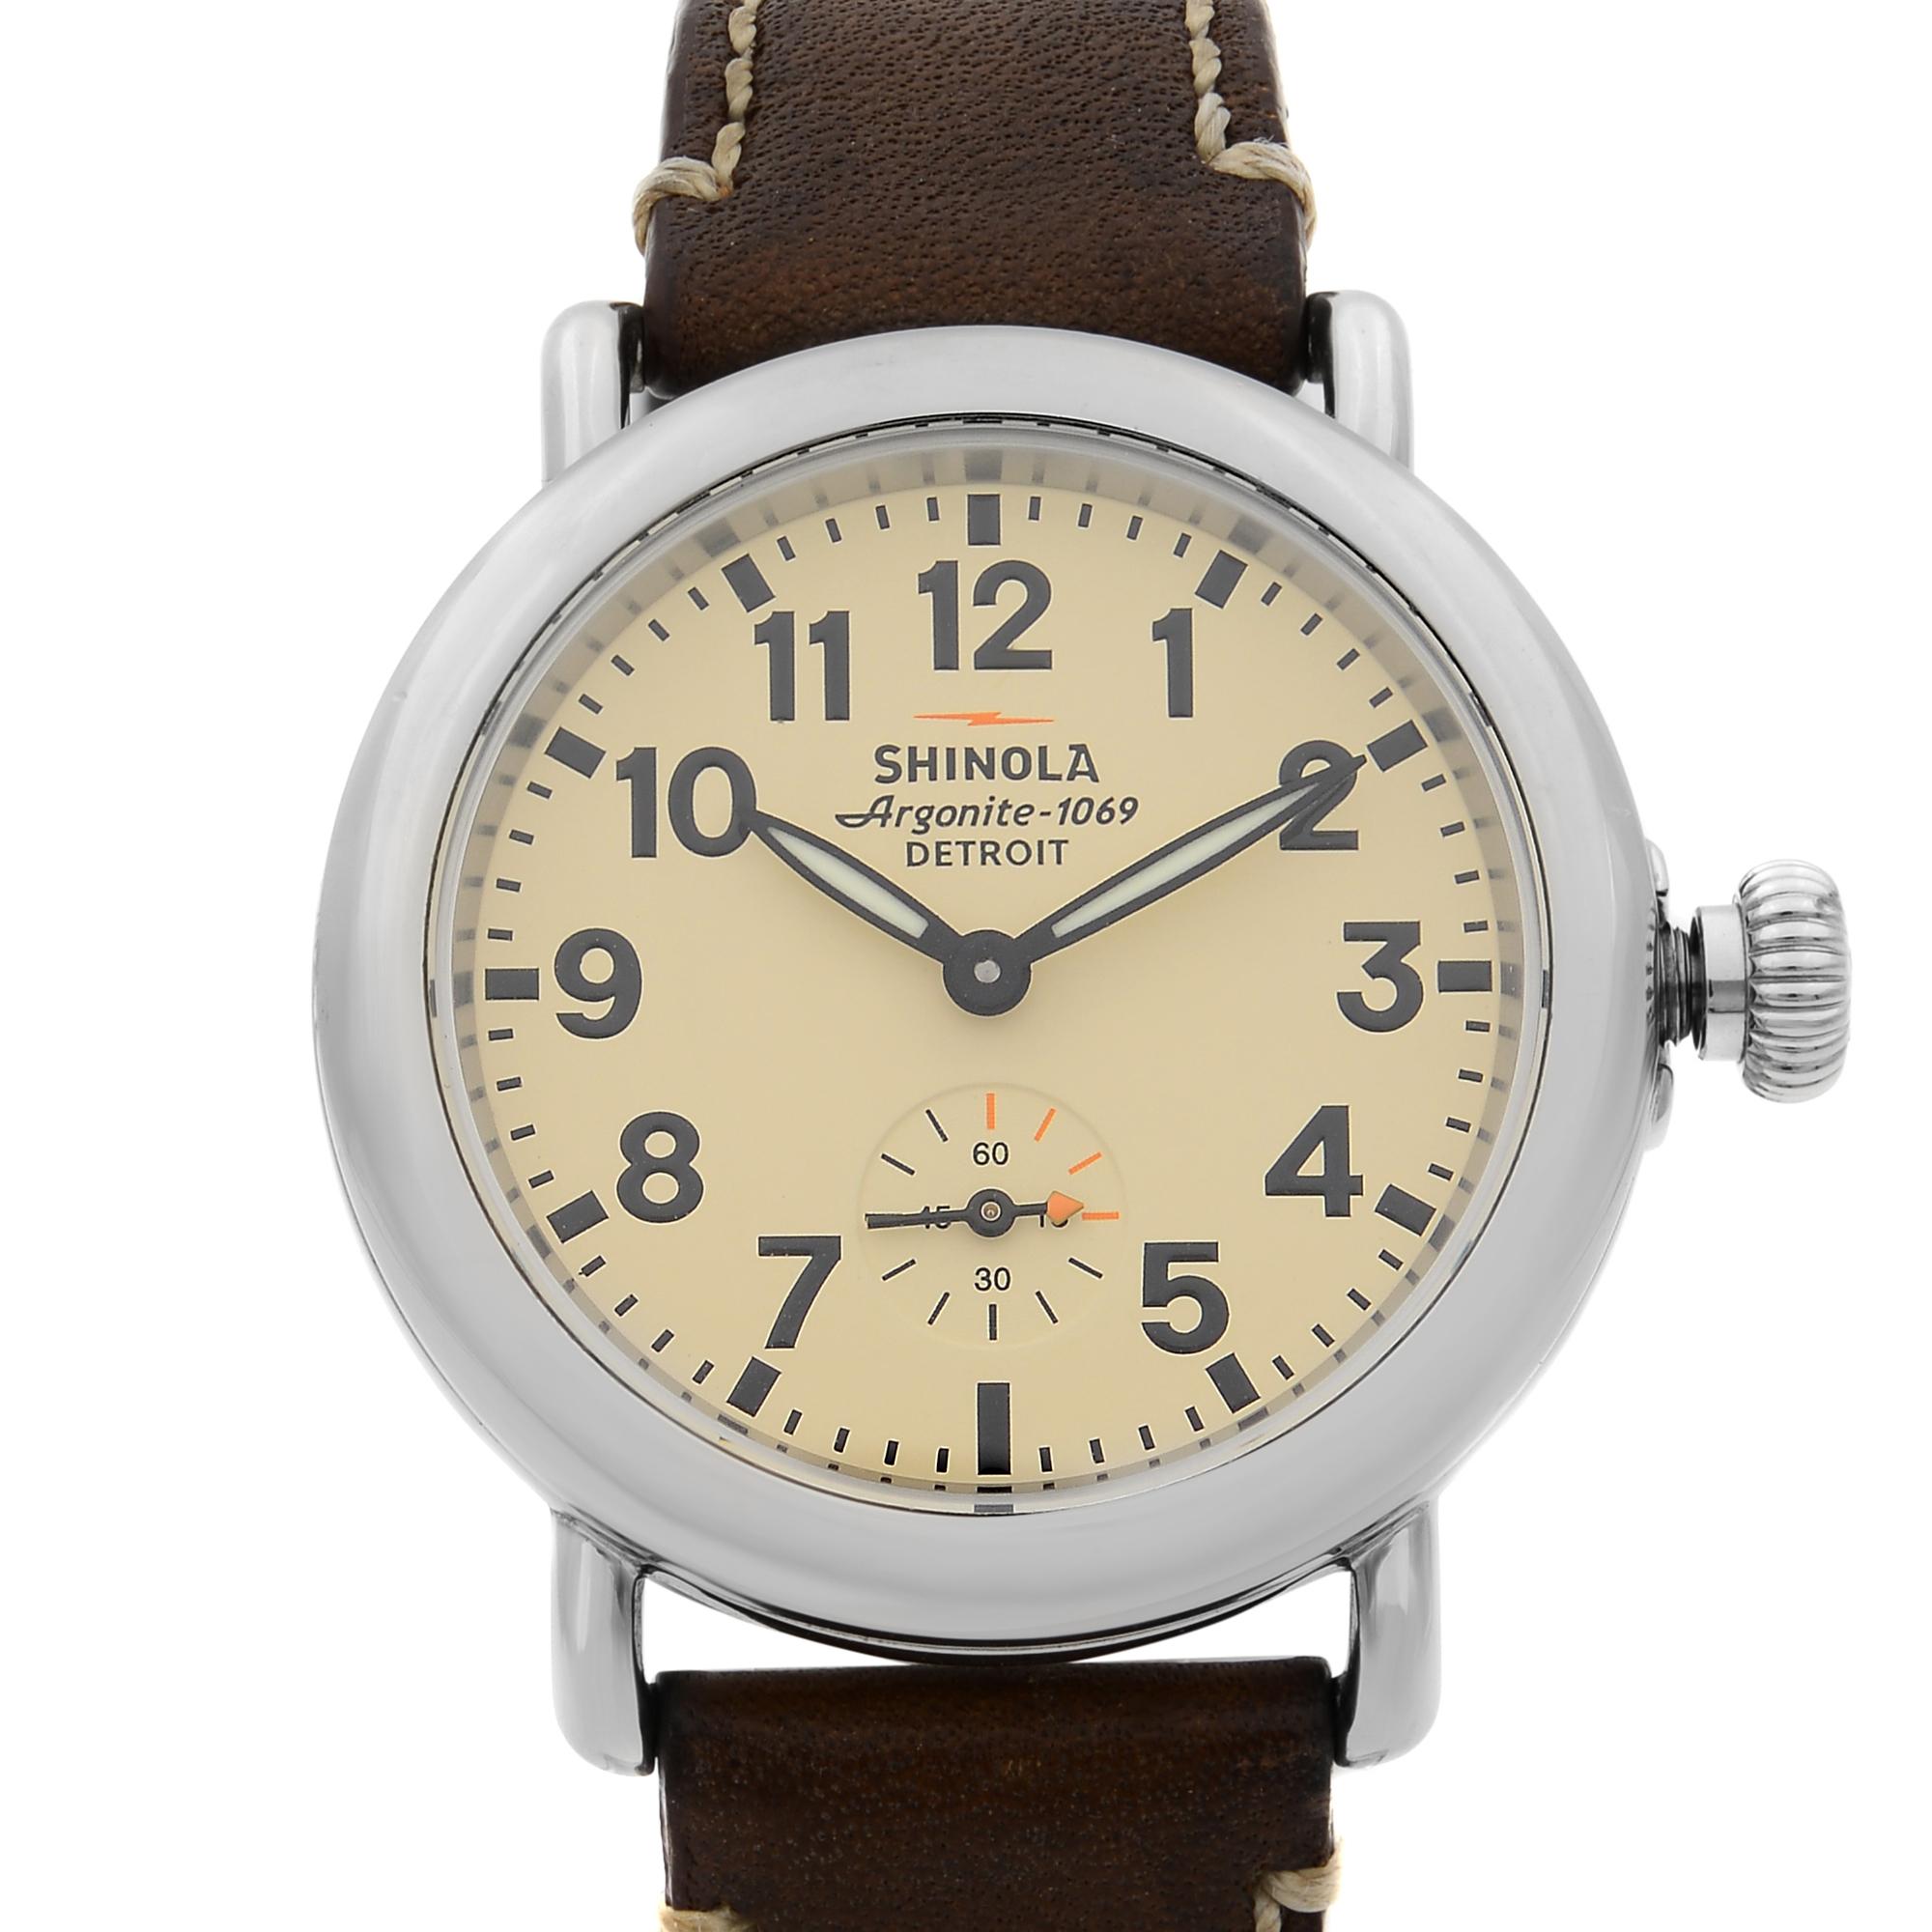 This pre-owned Shinola The Runwell S0200053 is a beautiful Ladie's timepiece that is powered by quartz (battery) movement which is cased in a stainless steel case. It has a round shape face, small seconds subdial dial and has hand arabic numerals